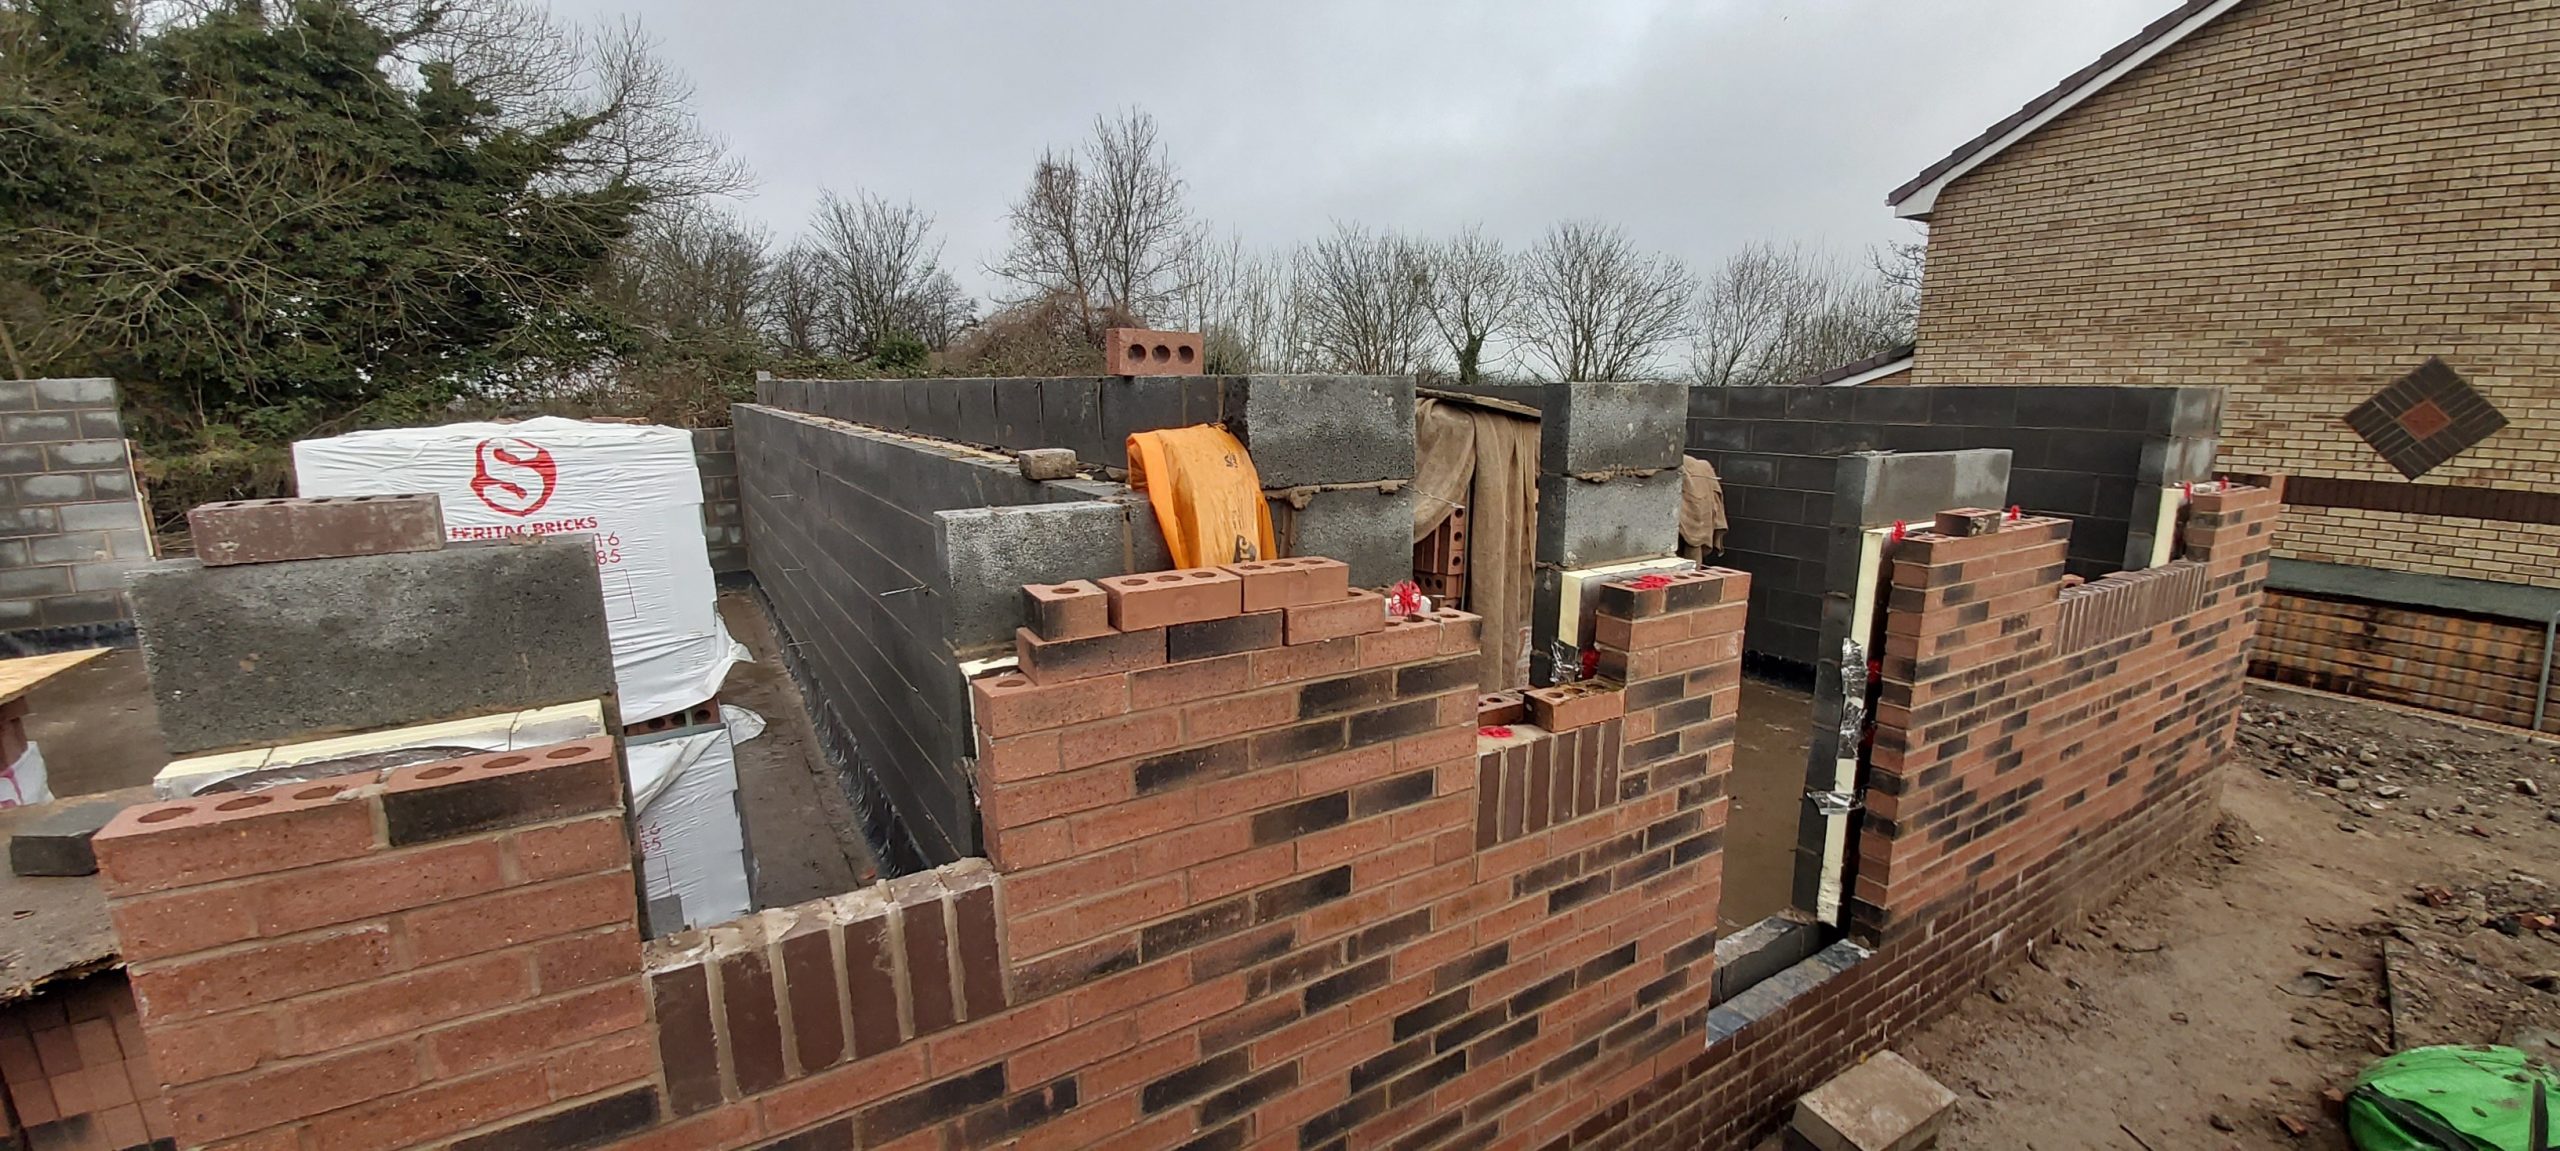 End of February 2020, Outer Brickwork Ground Level